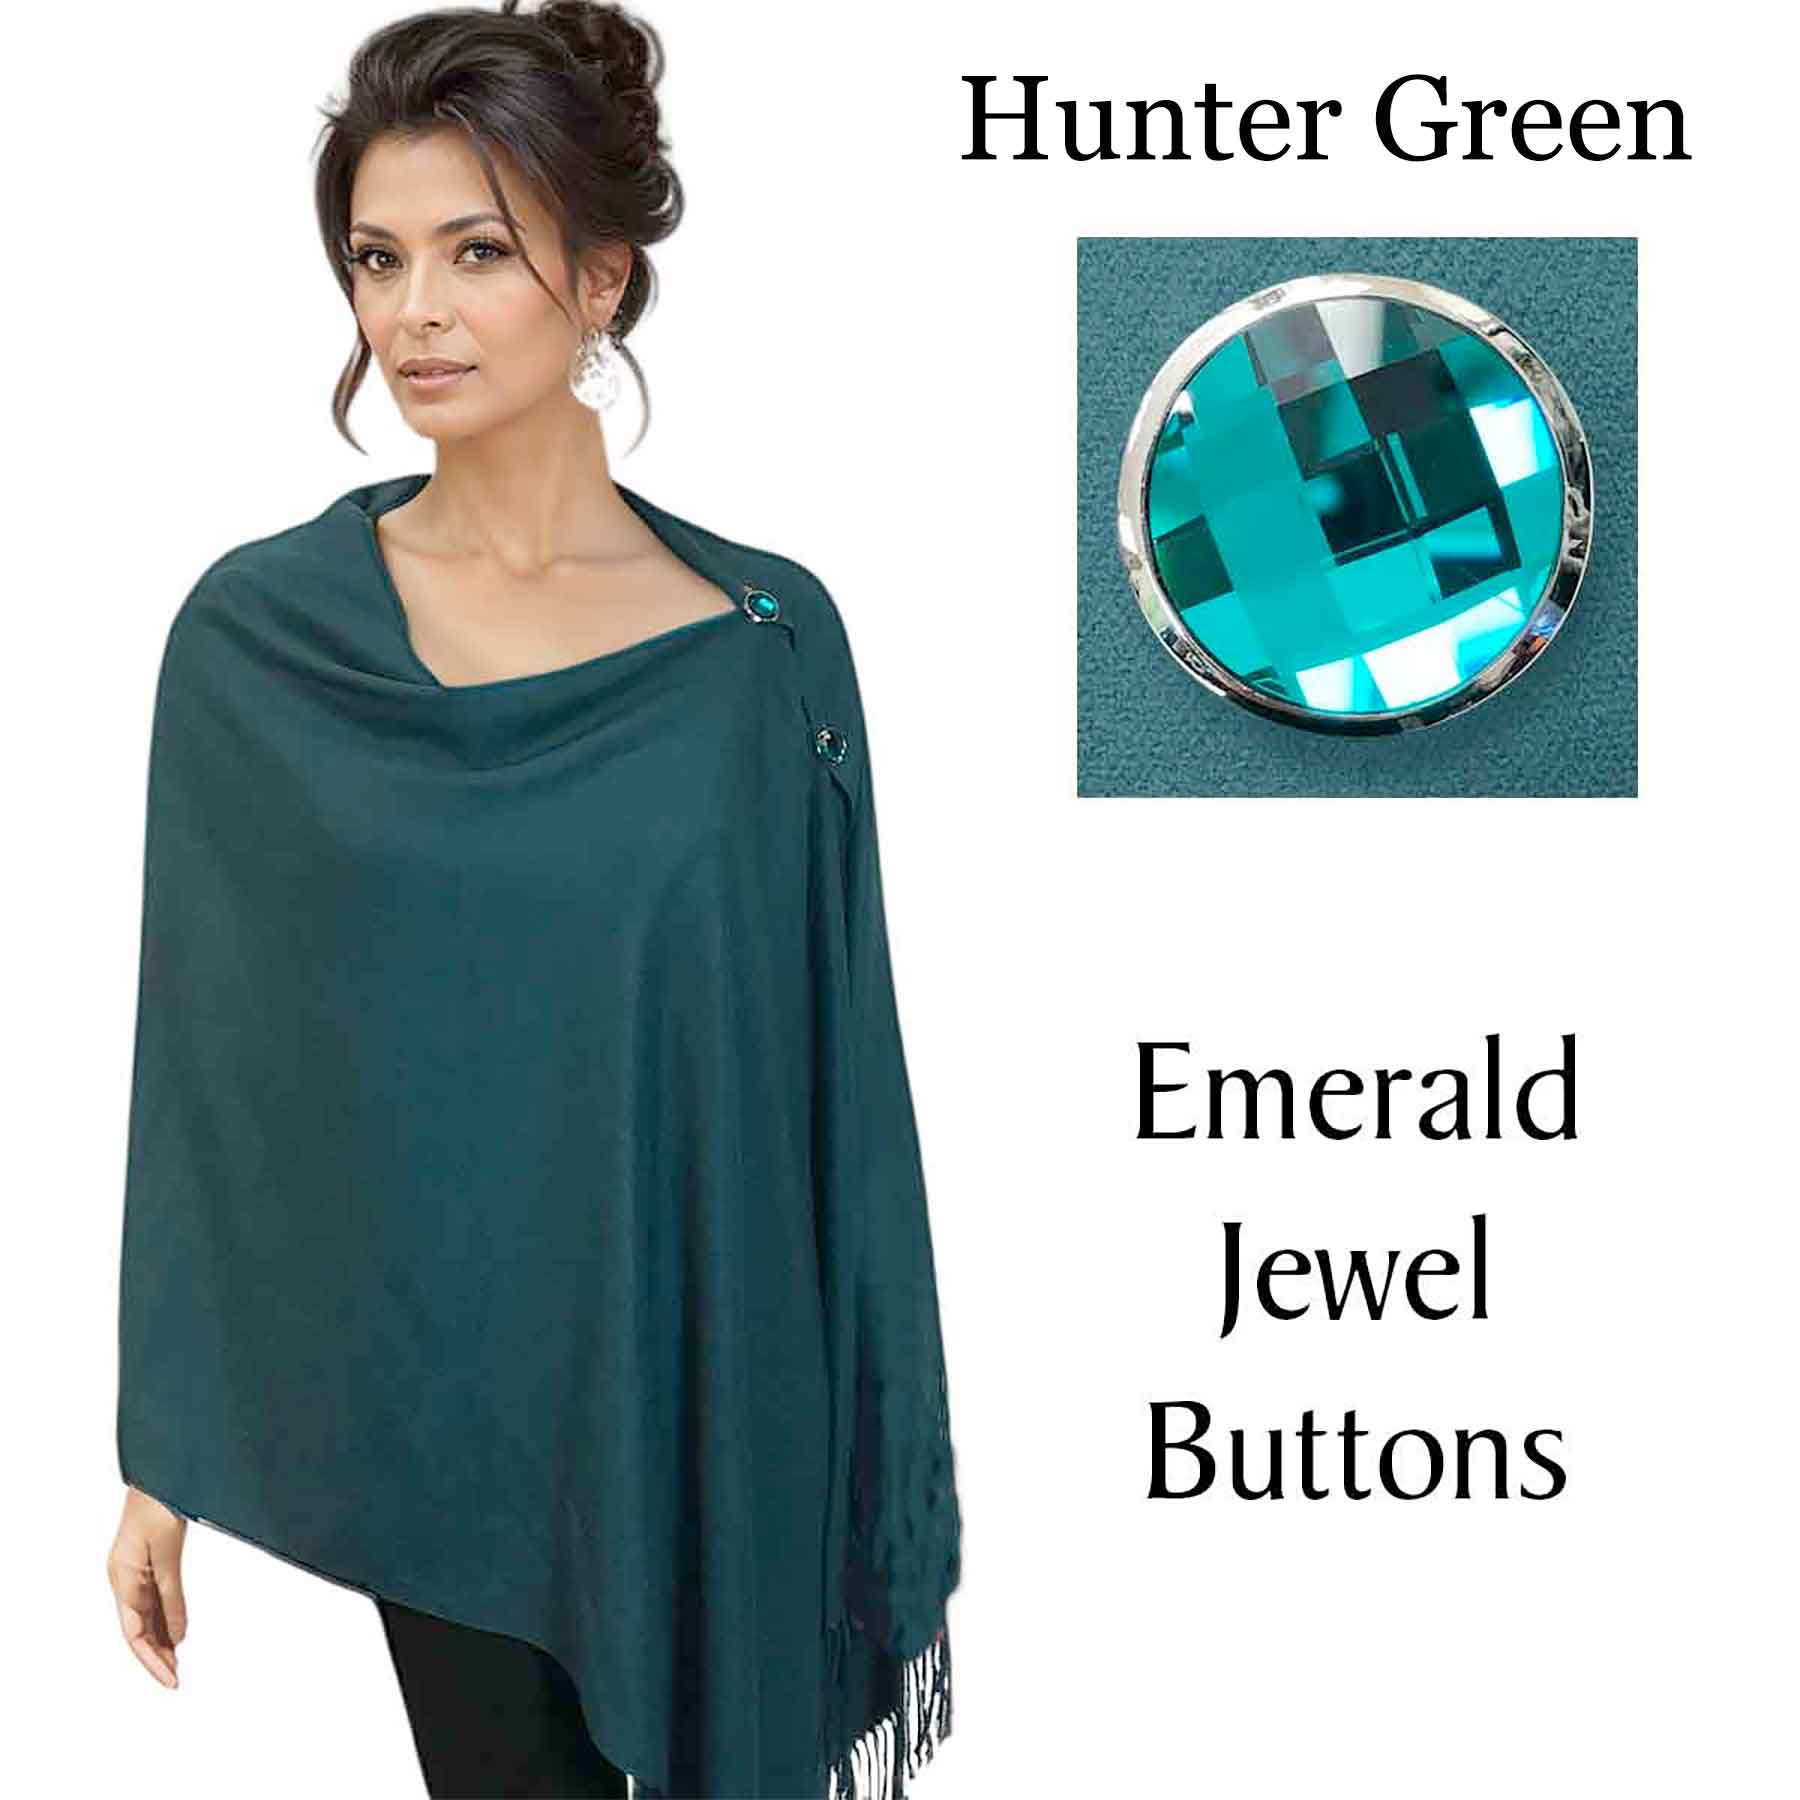 #22 Hunter Green with Emerald Jewel Buttons